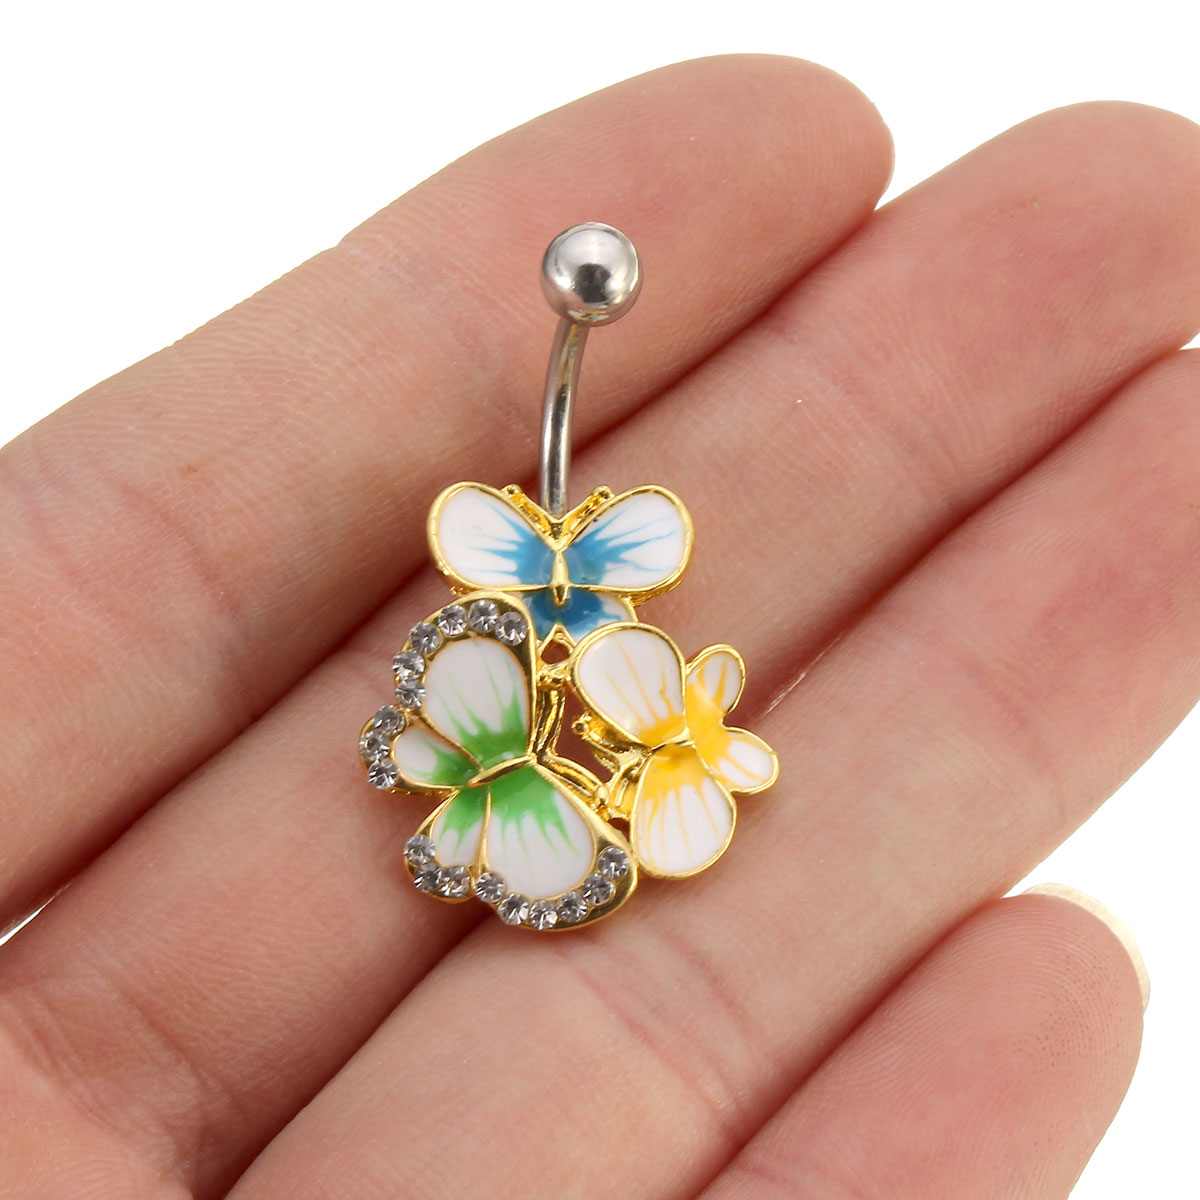 Crystal-Colorful-Belly-Navel-Bar-Ring-Butterfly-Body-Jewelry-1034476